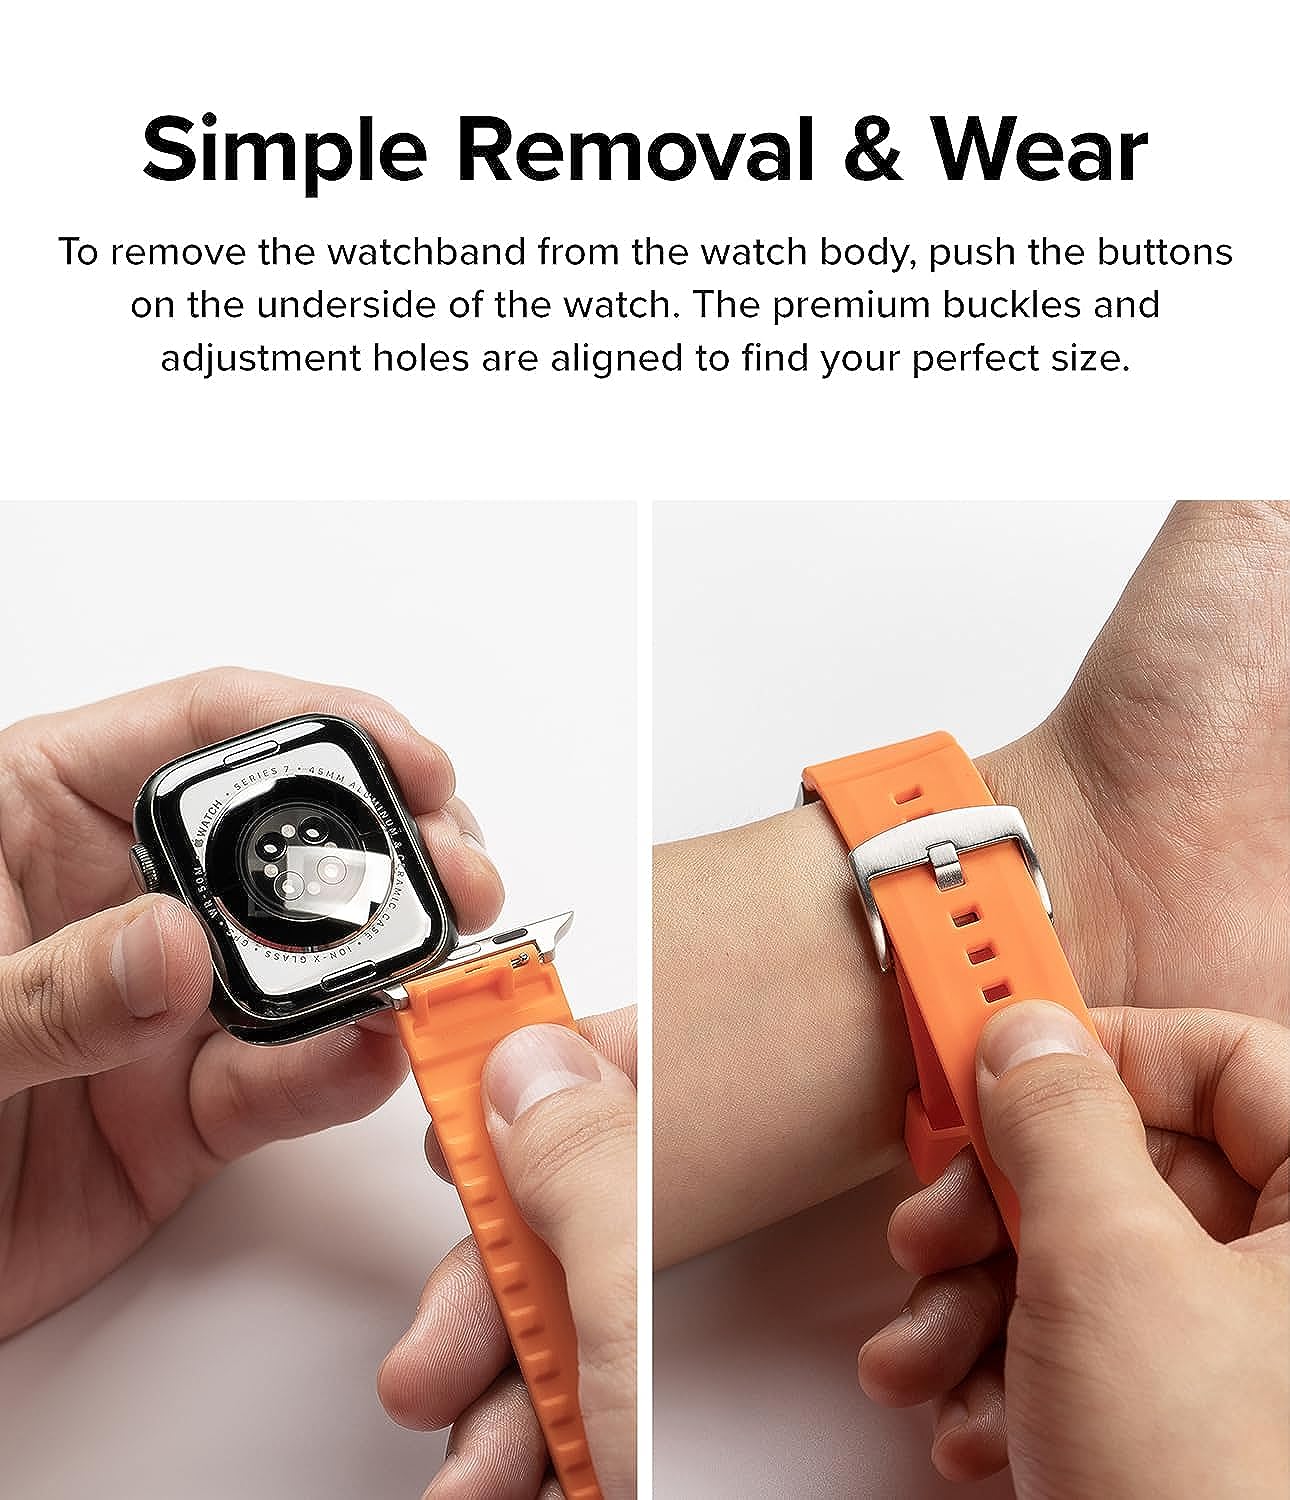 An Apple Watch with a temperature sensor? SLAP IT ON ME, DADDY